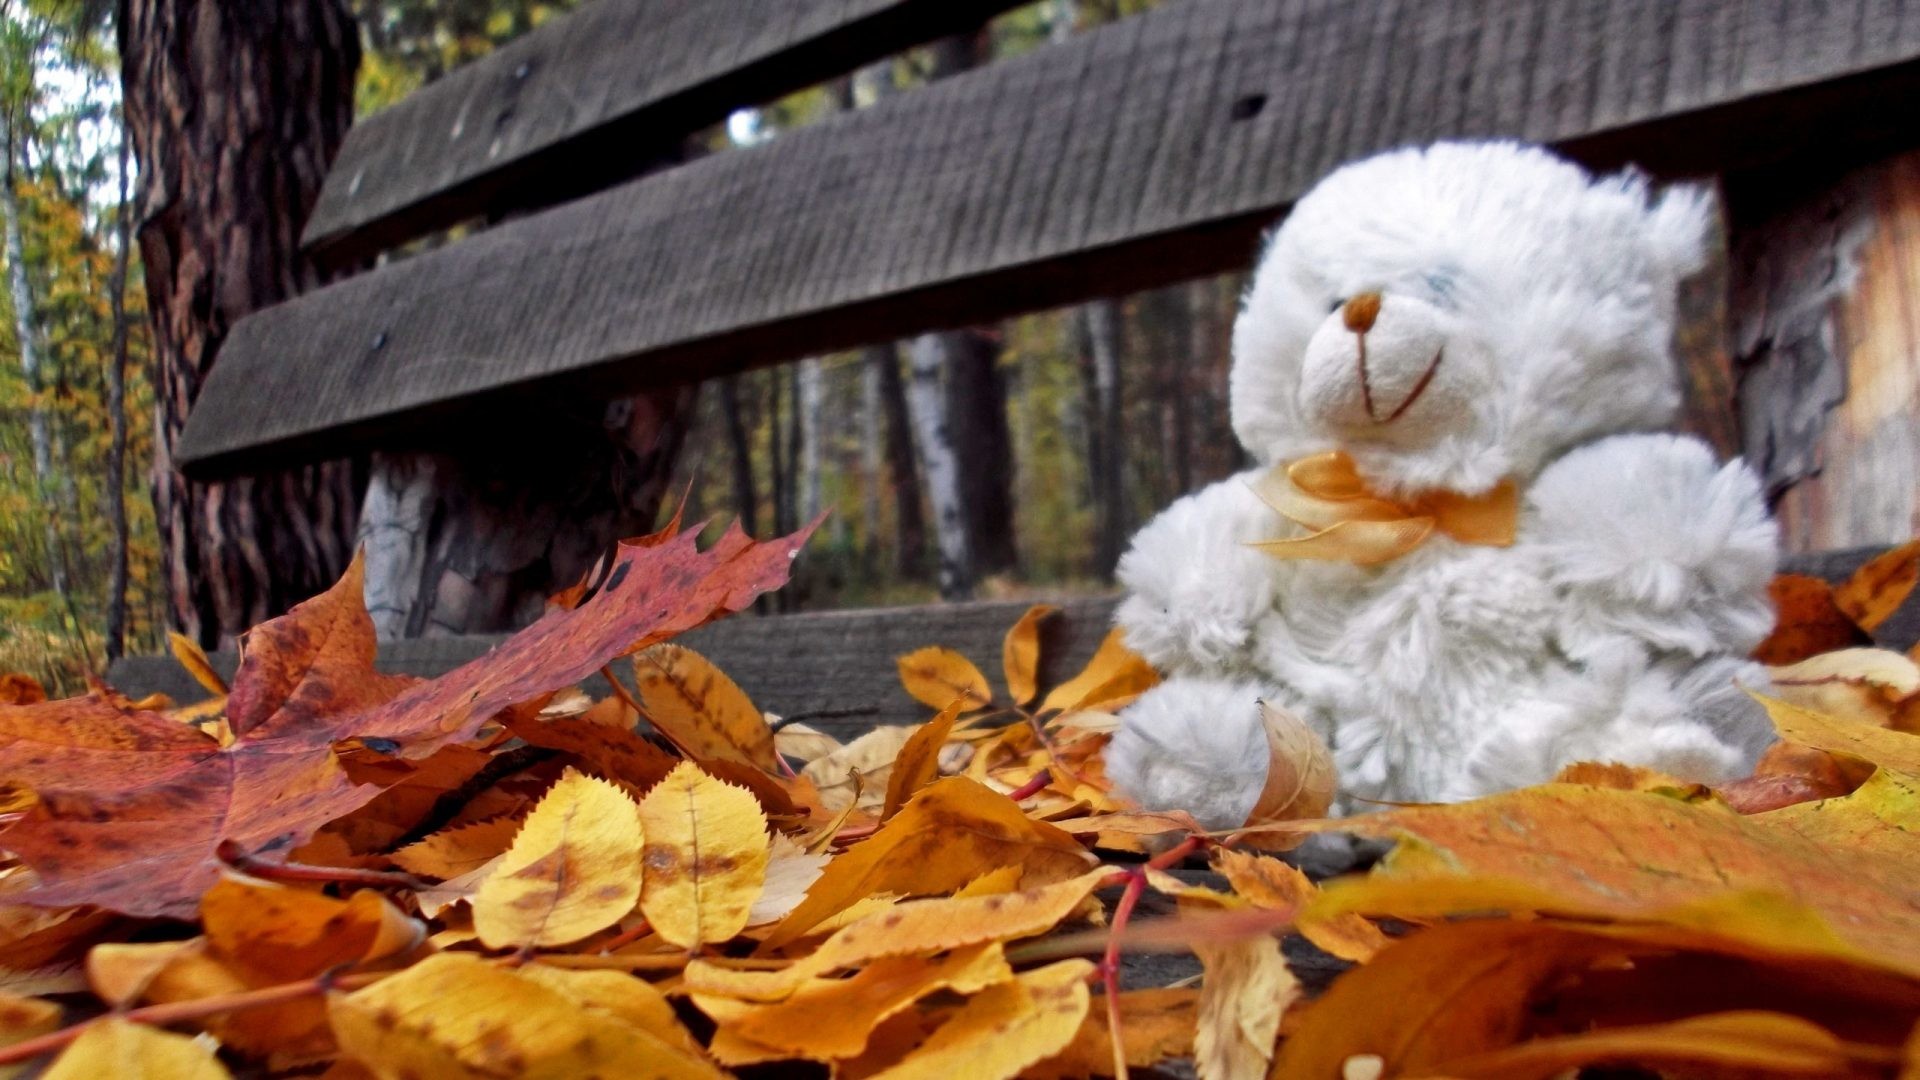 1920x1080 Loneliness Tag - Bench Bears Loneliness Leaves Trees Autumn Teddy Photos  Desktop Nature for HD 16